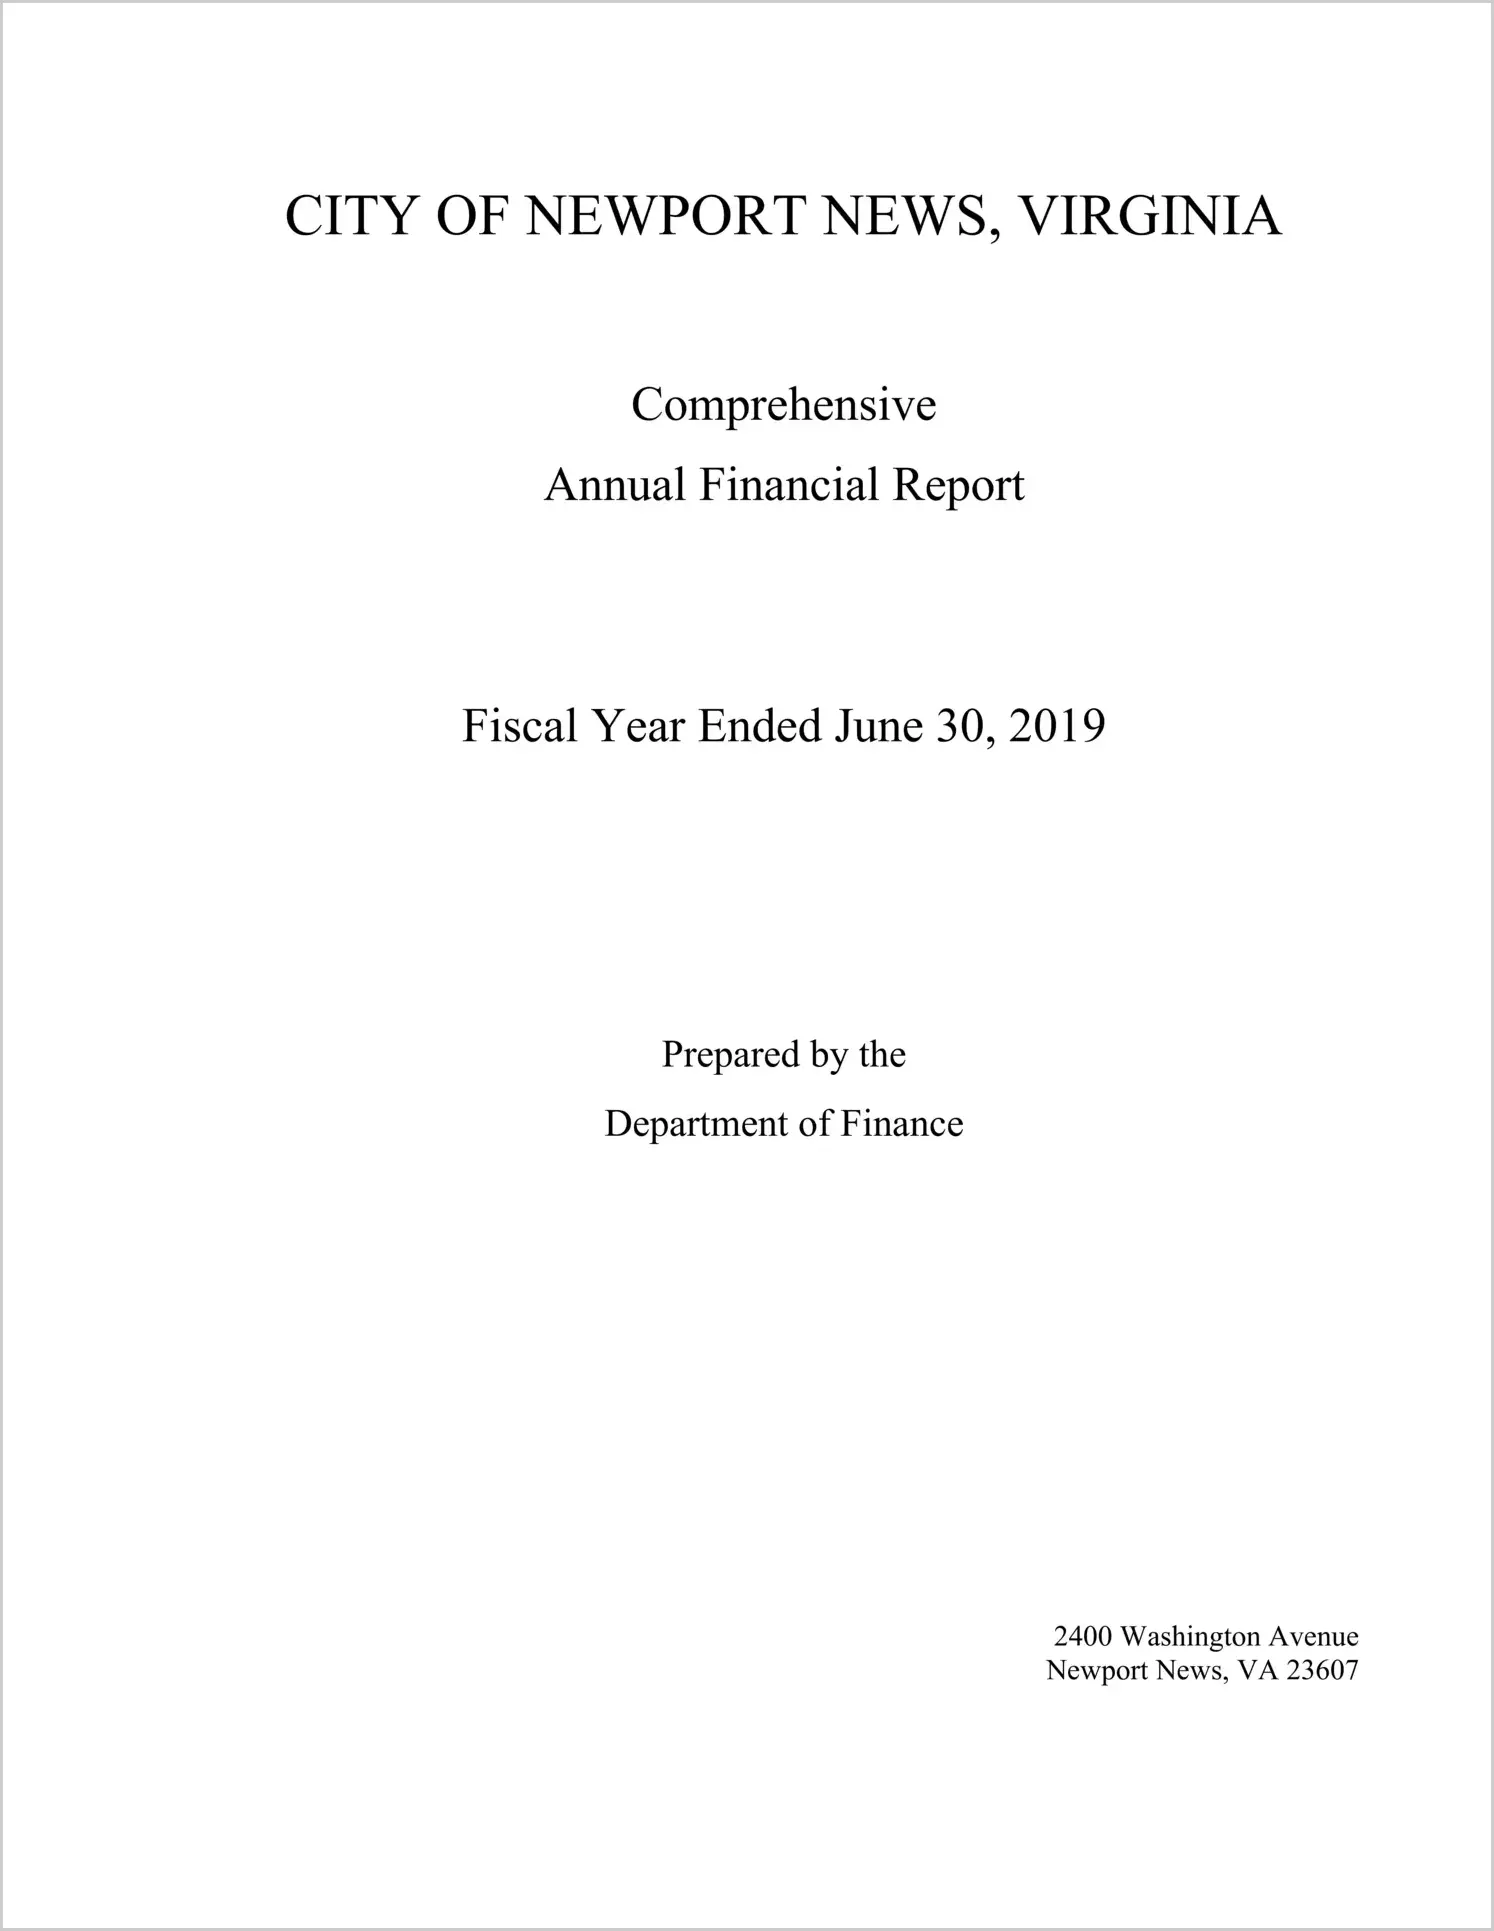 2019 Annual Financial Report for City of Newport News